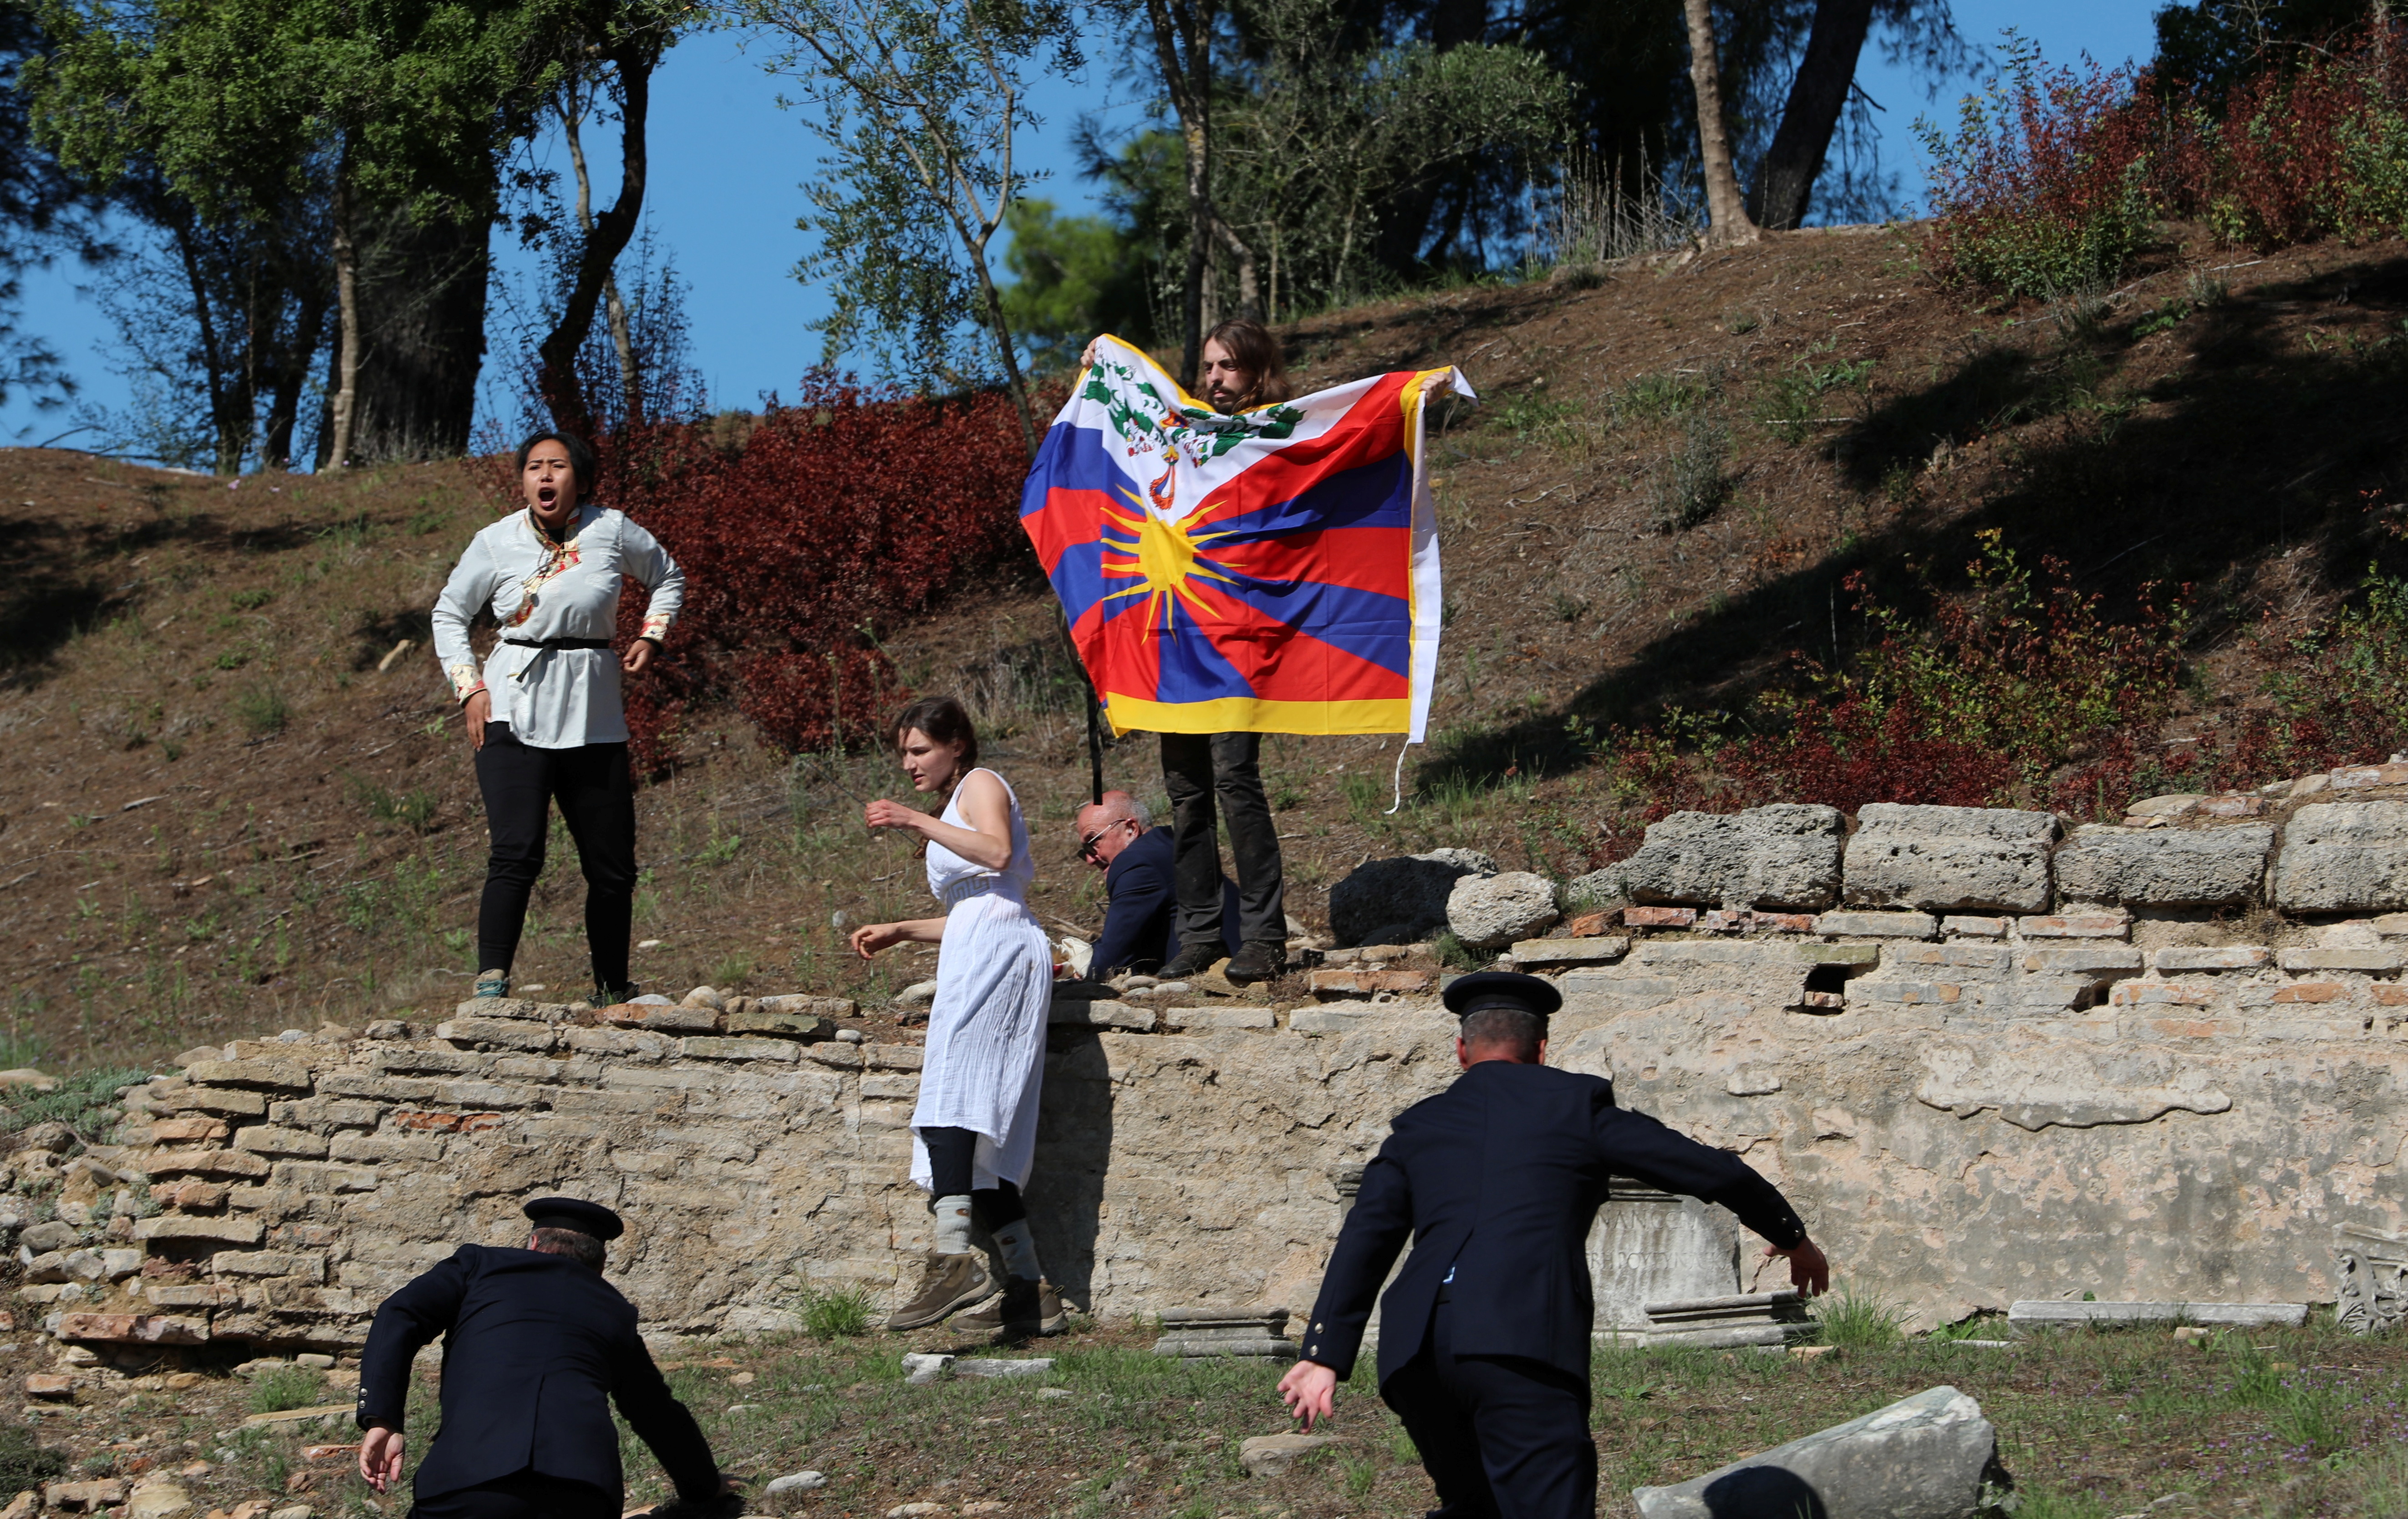 Winter Olympics - Lighting ceremony of the Olympic flame for the Beijing 2022 Winter Olympics - Ancient Olympia, Olympia, Greece - October 18, 2021 A protester holds a Tibetan flag during the Olympic flame lighting ceremony for the Beijing 2022 Winter Olympics REUTERS/Costas Baltas     